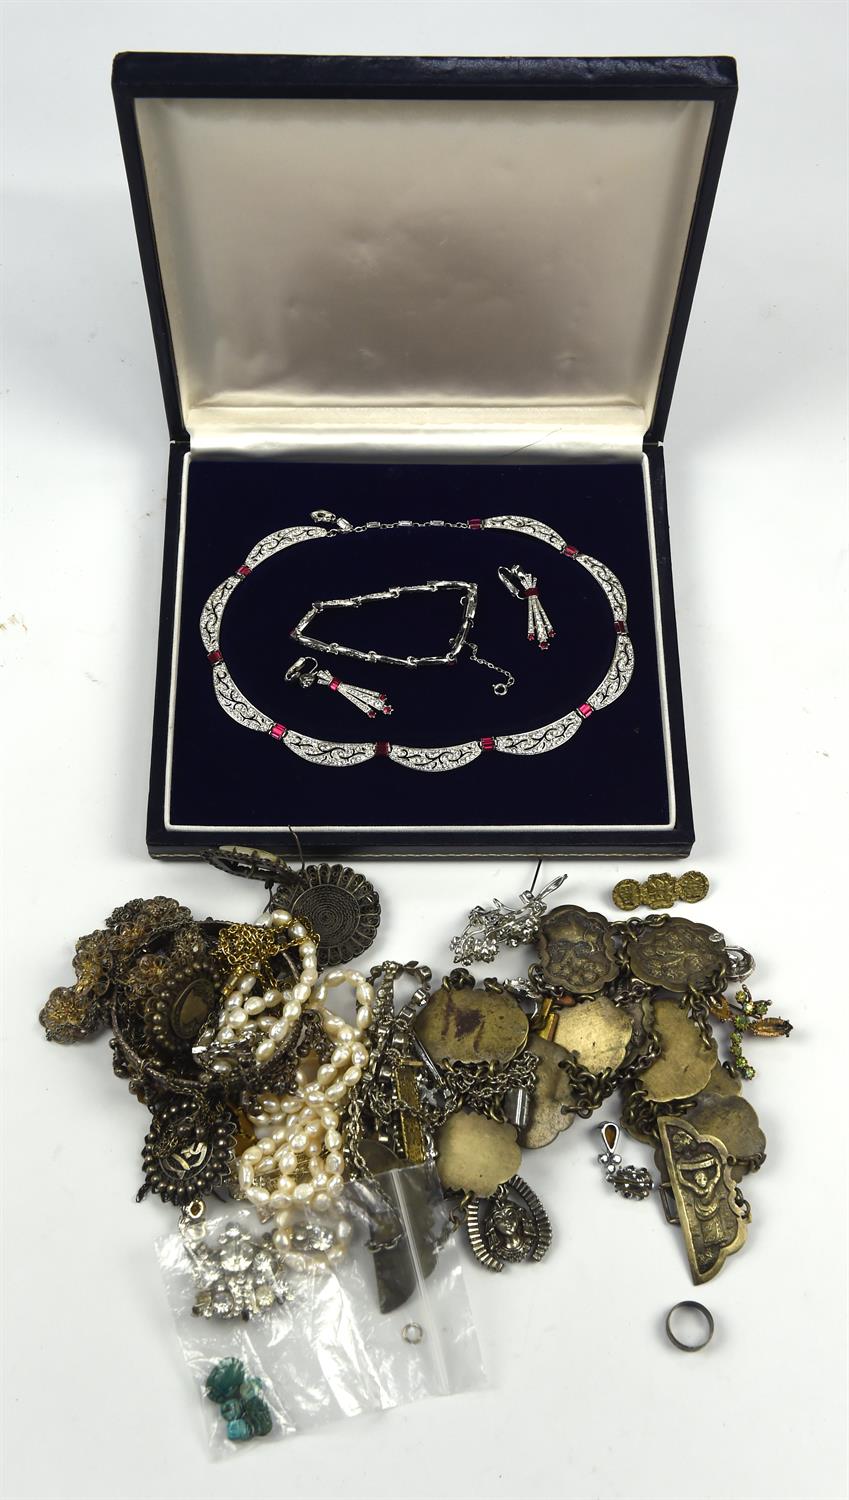 A collection of costume jewellery including a paste necklace earrings and bracelet set